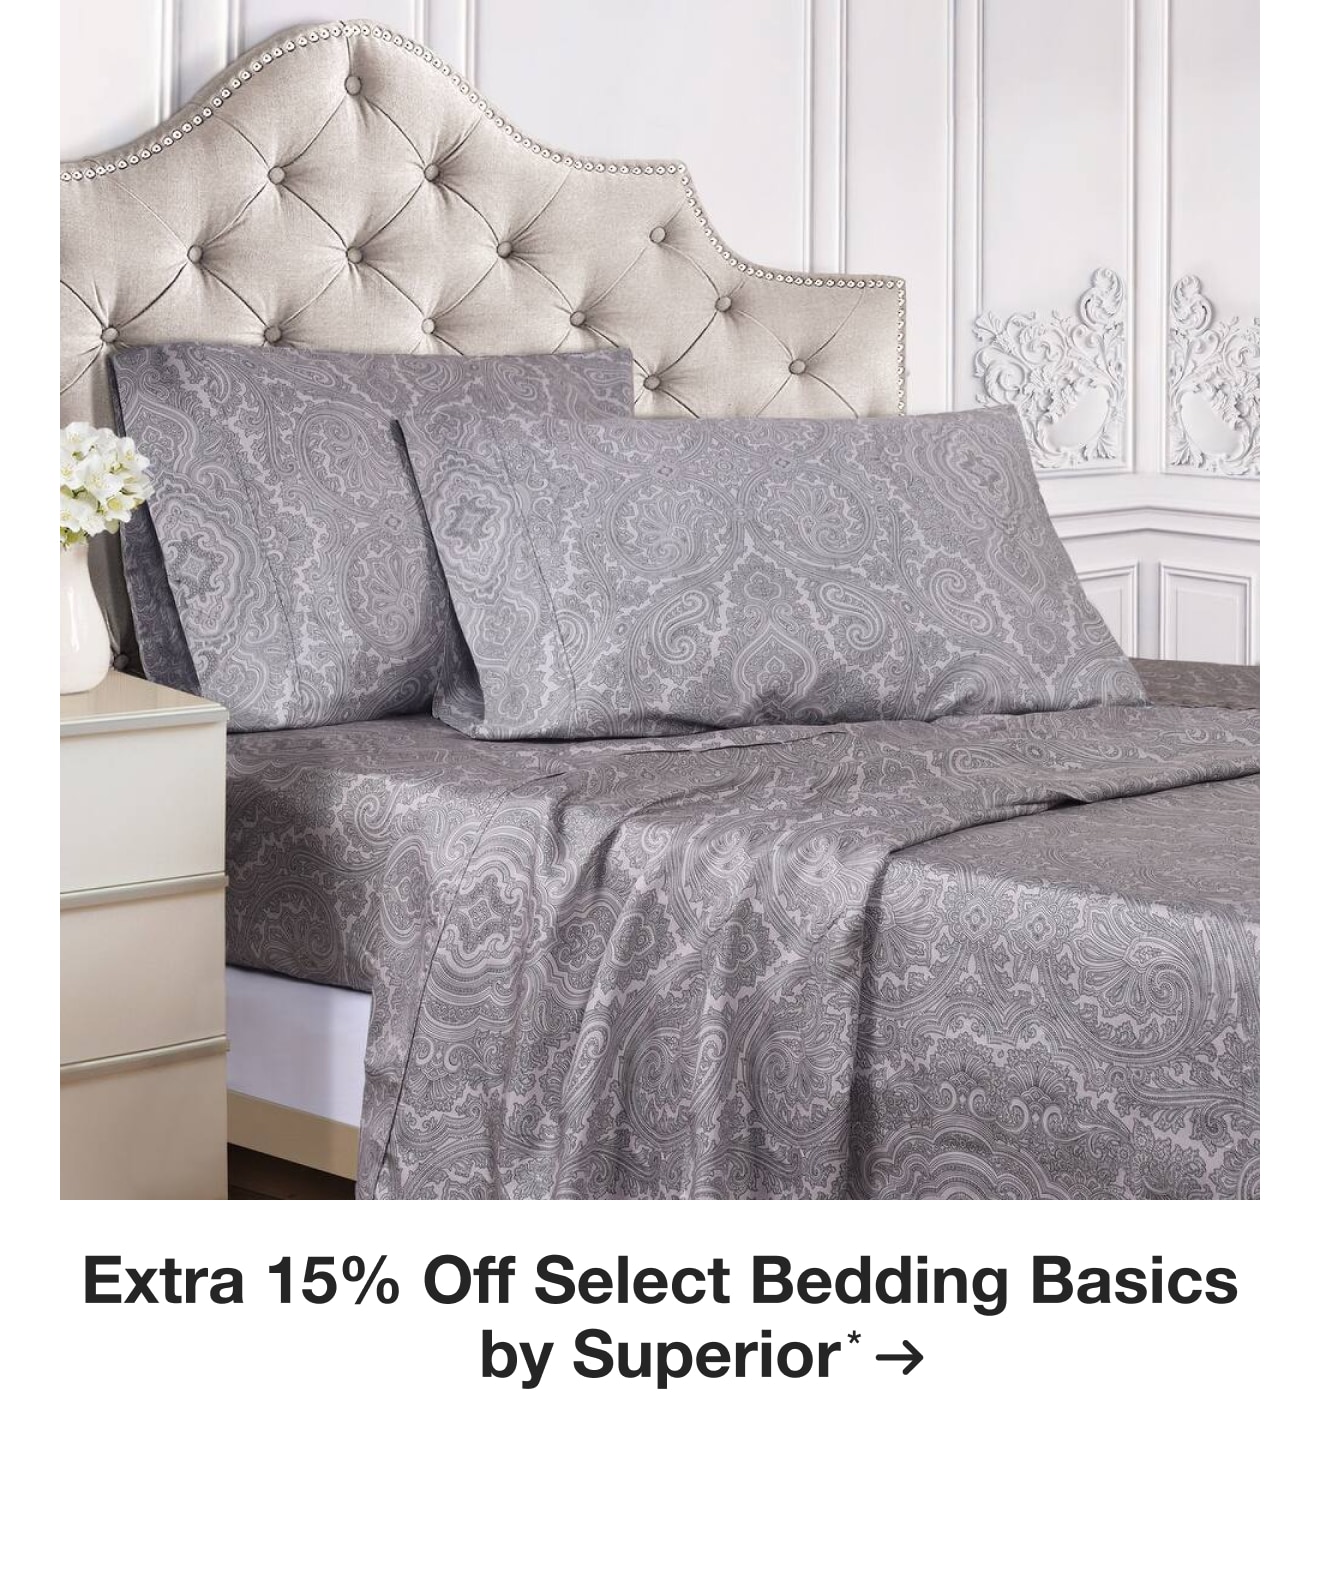 Up to 15% off Select Bedding Basics by Superior*